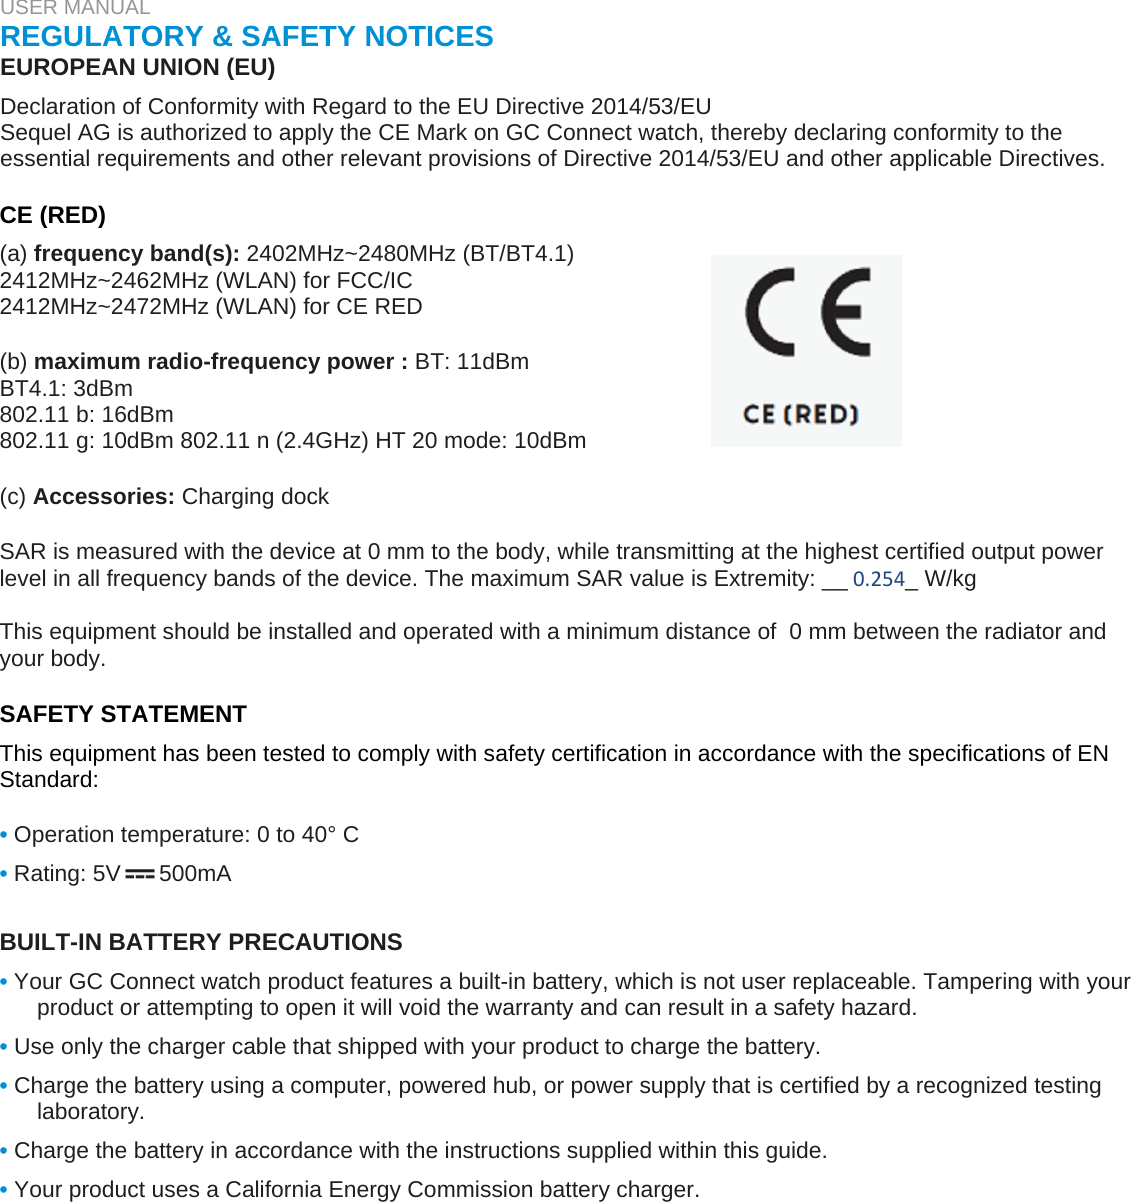 USER MANUAL  REGULATORY &amp; SAFETY NOTICES  EUROPEAN UNION (EU)  Declaration of Conformity with Regard to the EU Directive 2014/53/EU  Sequel AG is authorized to apply the CE Mark on GC Connect watch, thereby declaring conformity to the essential requirements and other relevant provisions of Directive 2014/53/EU and other applicable Directives.   CE (RED)  (a) frequency band(s): 2402MHz~2480MHz (BT/BT4.1)  2412MHz~2462MHz (WLAN) for FCC/IC  2412MHz~2472MHz (WLAN) for CE RED   (b) maximum radio-frequency power : BT: 11dBm  BT4.1: 3dBm  802.11 b: 16dBm  802.11 g: 10dBm 802.11 n (2.4GHz) HT 20 mode: 10dBm   (c) Accessories: Charging dock  SAR is measured with the device at 0 mm to the body, while transmitting at the highest certified output power level in all frequency bands of the device. The maximum SAR value is Extremity: __0.254_ W/kg  This equipment should be installed and operated with a minimum distance of  0 mm between the radiator and your body.  SAFETY STATEMENT  This equipment has been tested to comply with safety certification in accordance with the specifications of EN Standard:   • Operation temperature: 0 to 40° C  • Rating: 5V      500mA   BUILT-IN BATTERY PRECAUTIONS  • Your GC Connect watch product features a built-in battery, which is not user replaceable. Tampering with your product or attempting to open it will void the warranty and can result in a safety hazard.  • Use only the charger cable that shipped with your product to charge the battery.  • Charge the battery using a computer, powered hub, or power supply that is certified by a recognized testing laboratory.  • Charge the battery in accordance with the instructions supplied within this guide.  • Your product uses a California Energy Commission battery charger.   